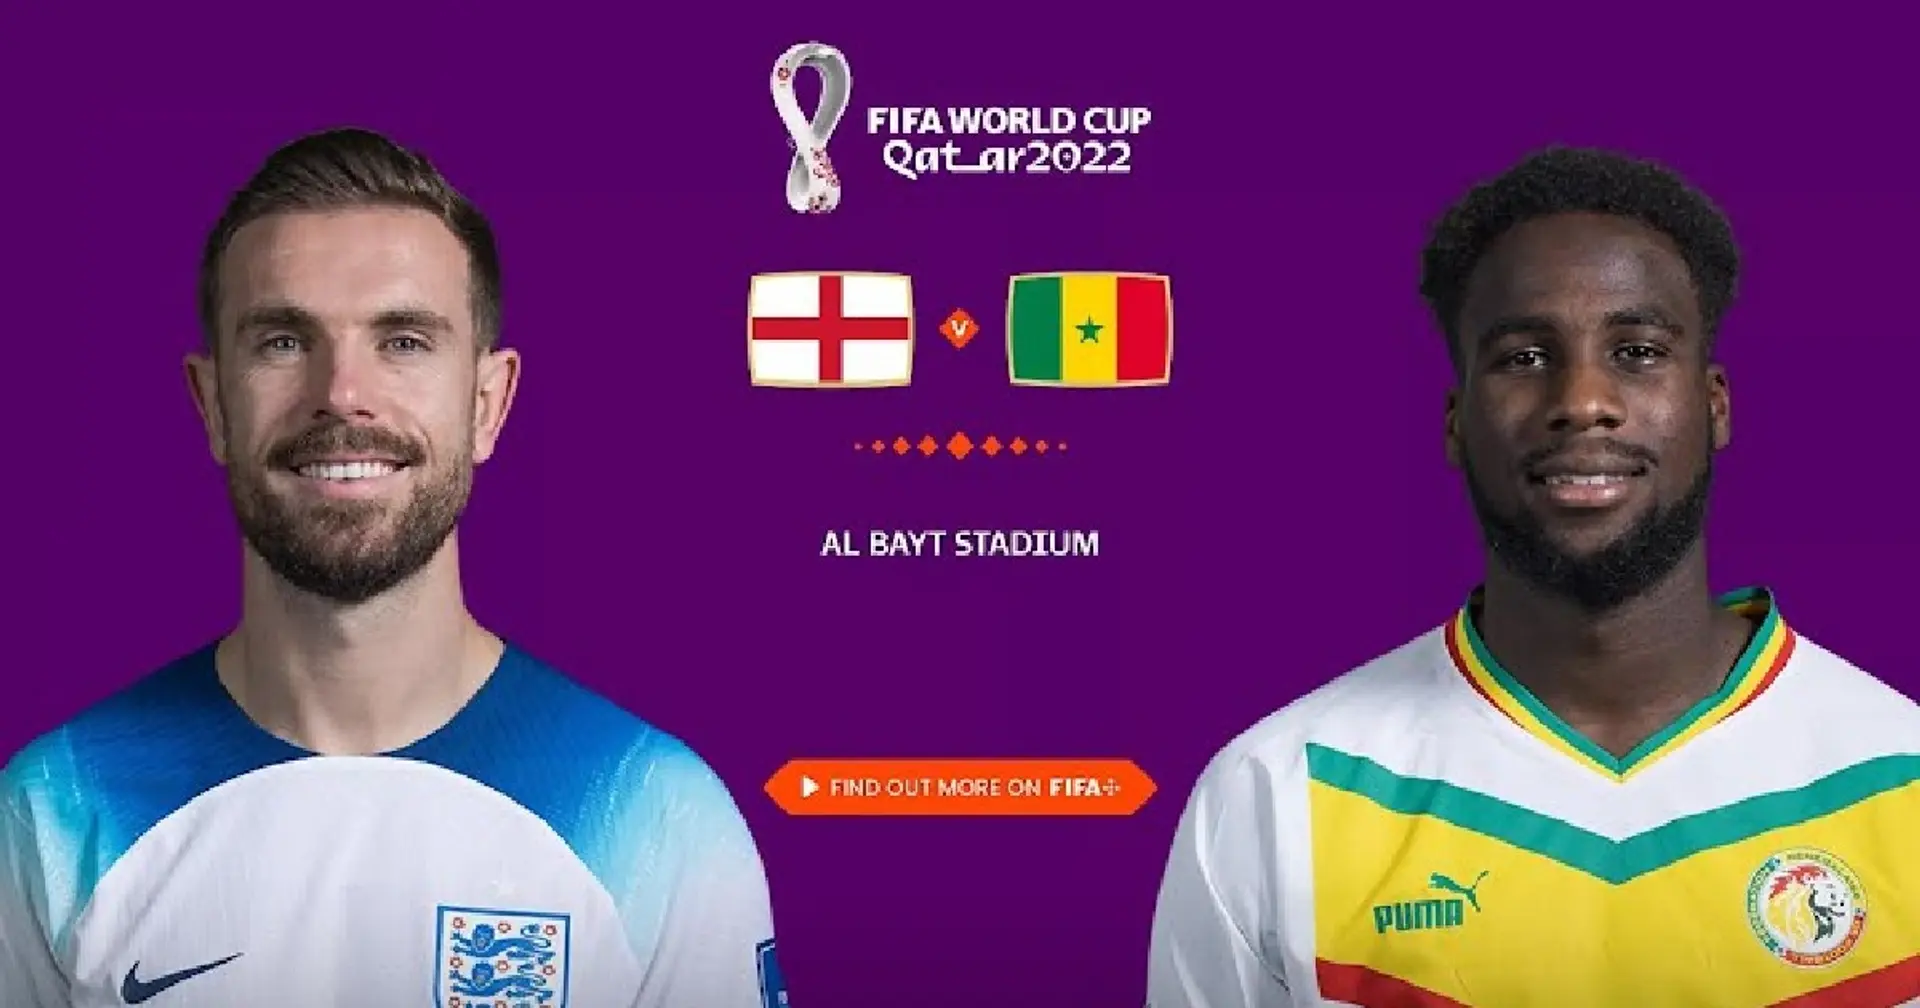 England v Senegal: Official team lineups for the World Cup clash revealed